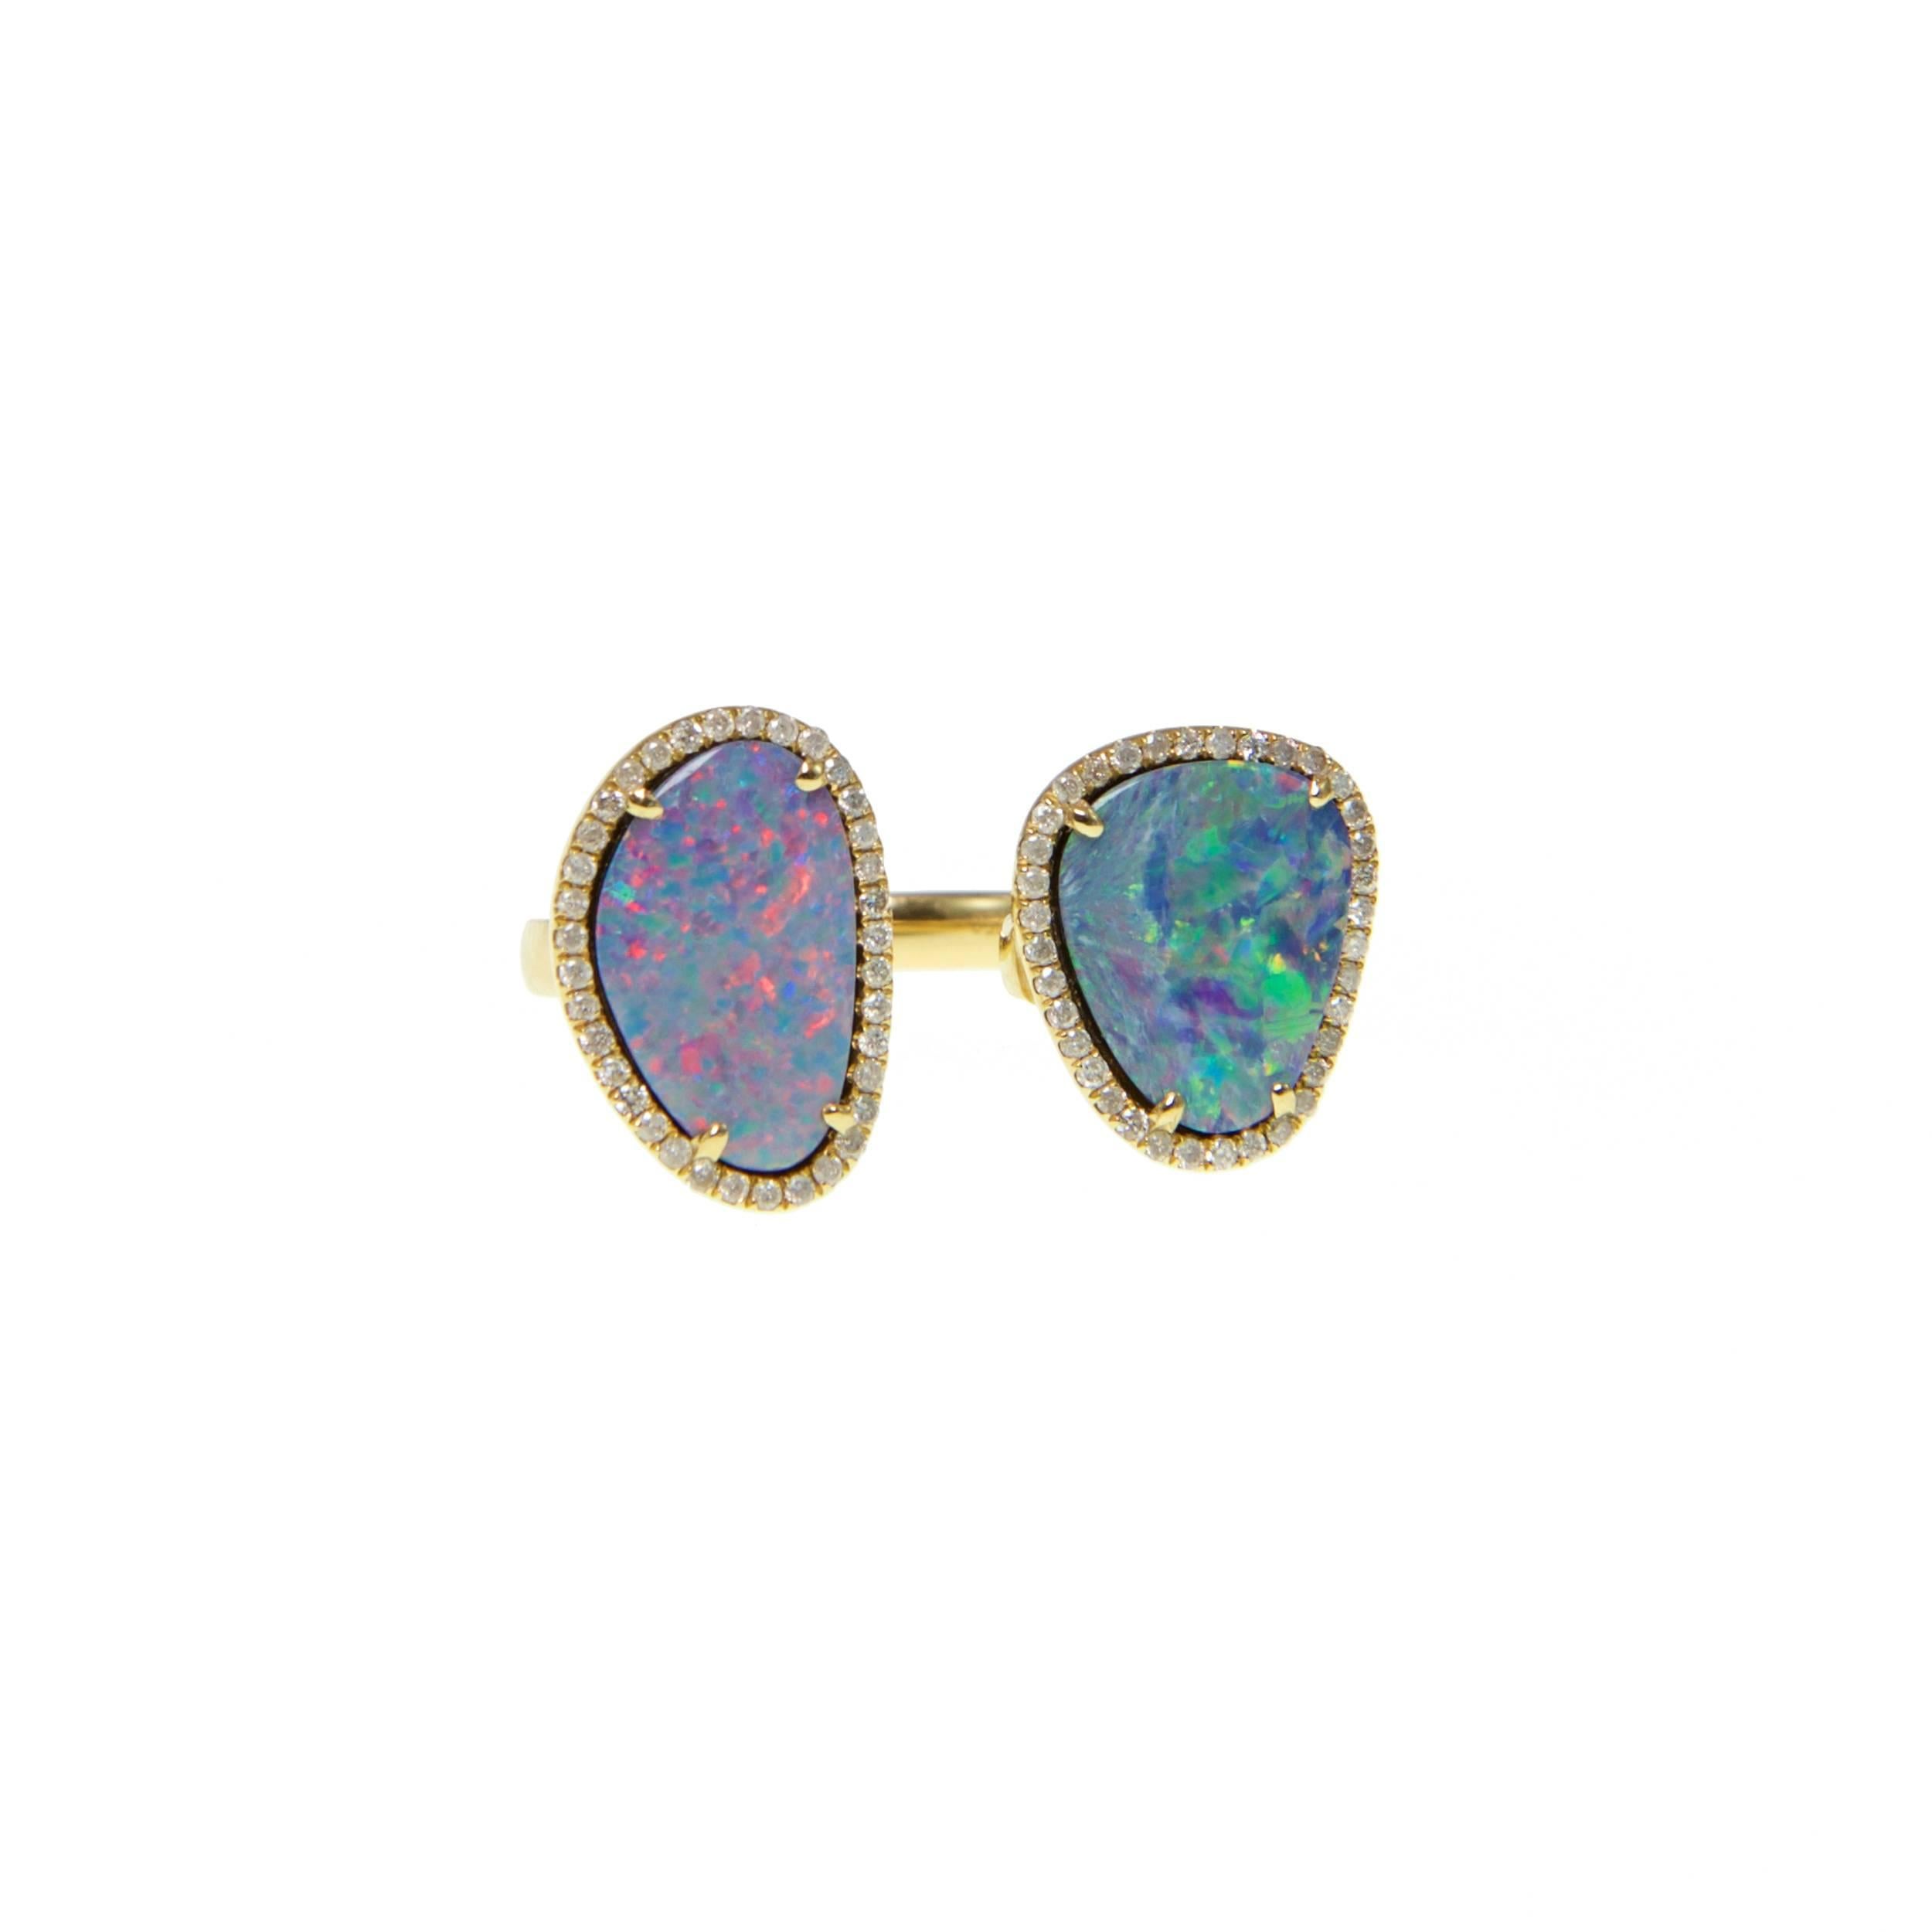 Balancing classic aesthetics with modern sensibilities, Ri Noor's Double Opal Slice Diamond Ring is designed to elevate any outfit, no matter the occasion. The ring consists of two dazzling and colorful opal slice s surrounded by round brilliant